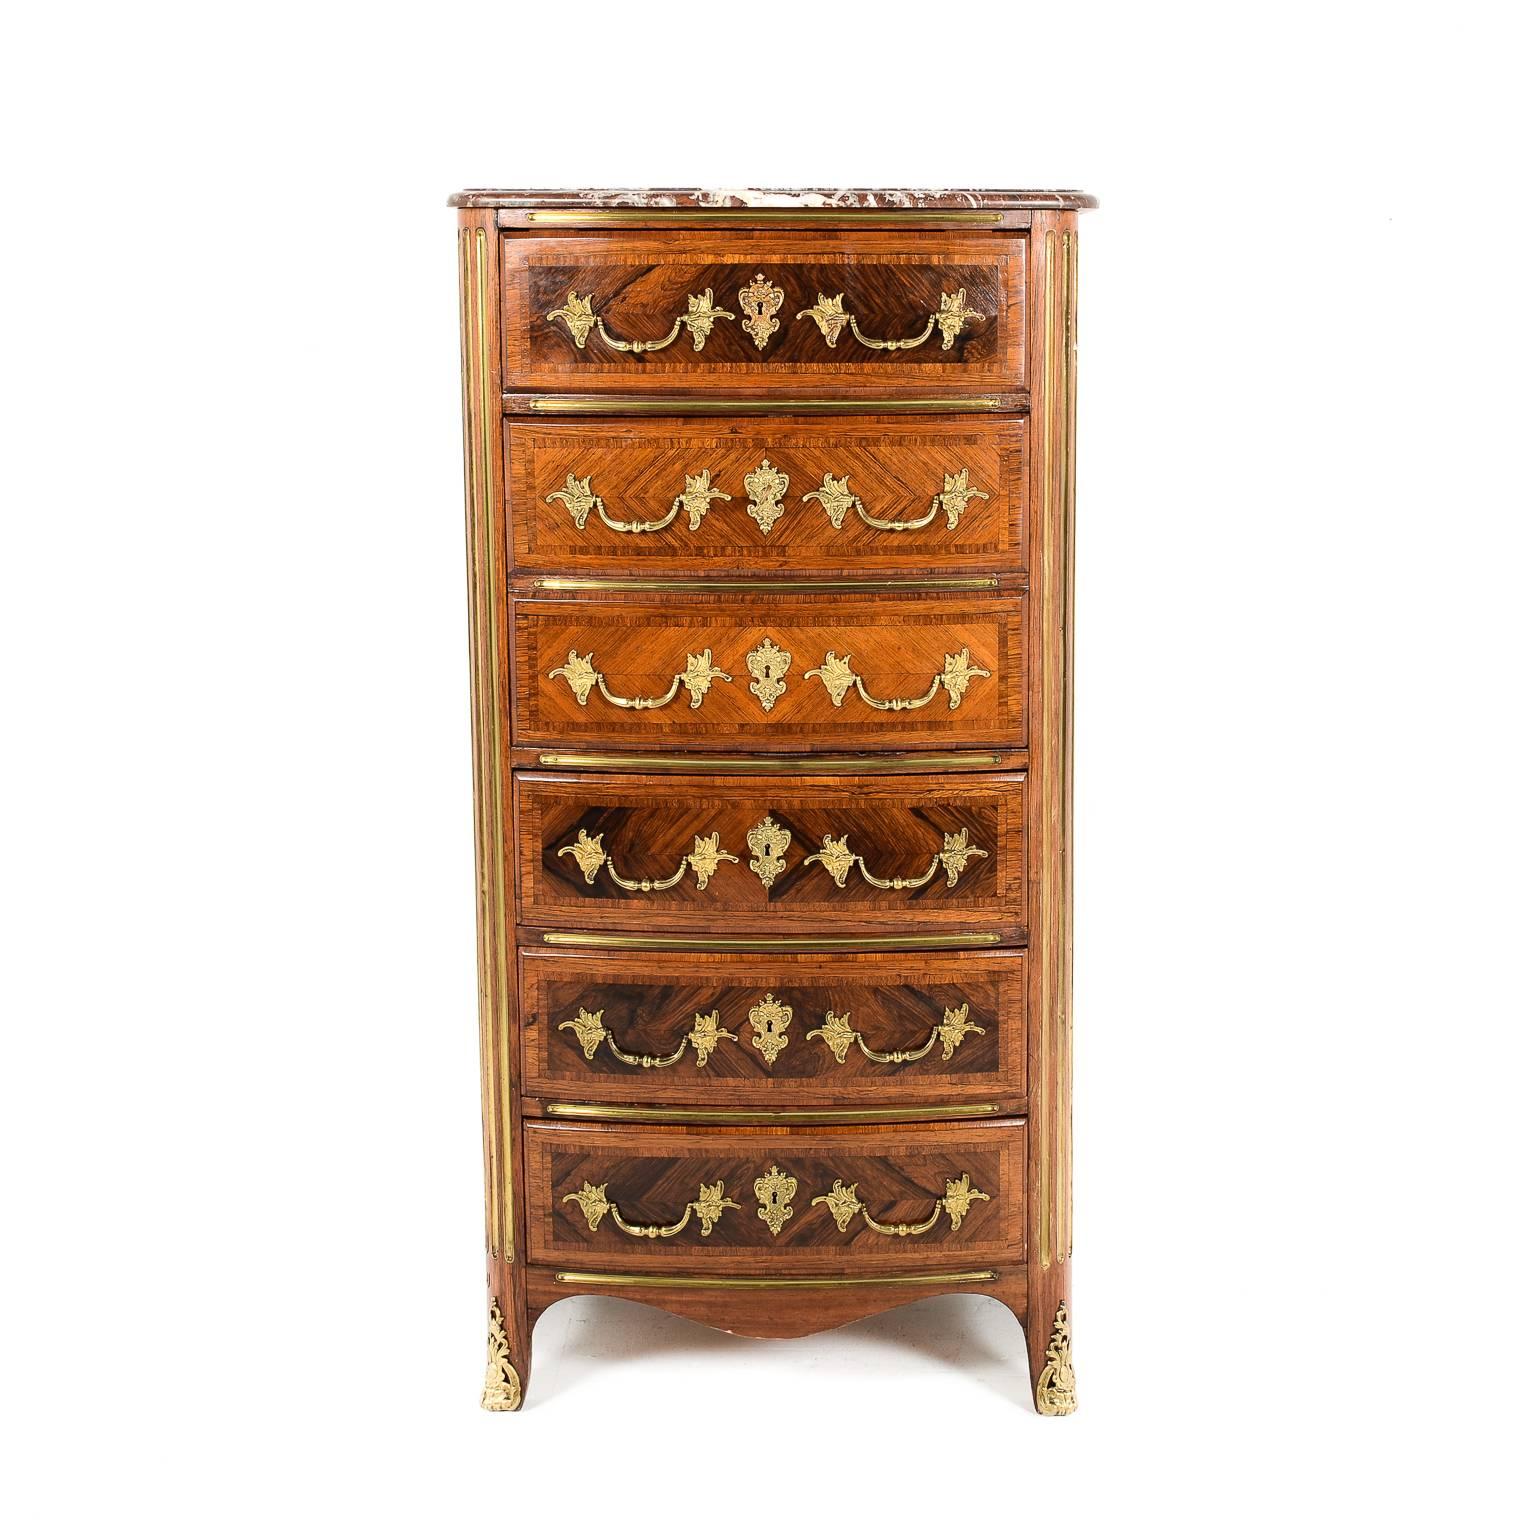 Regency-style inlaid rosewood and kingwood secretaire, with fabulous gilt mounts and pulls. Color and patina are exceptional on this piece, as is its original condition. 



 